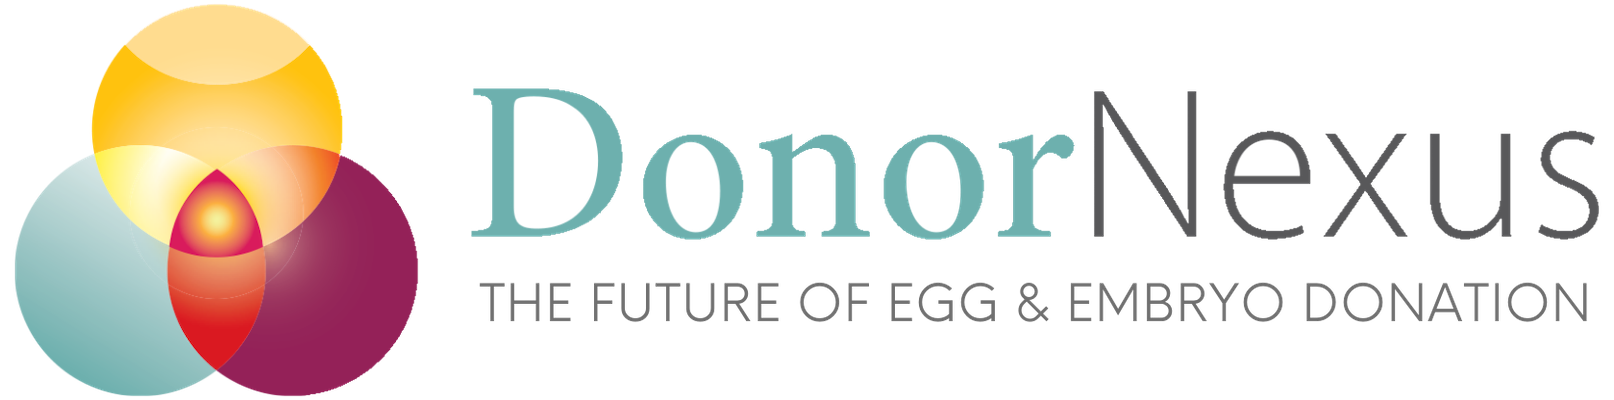 Register now to browse egg donor profiles in the Donor Nexus egg donor database, featuring donors available for fresh or frozen donor egg cycles. Welcome!